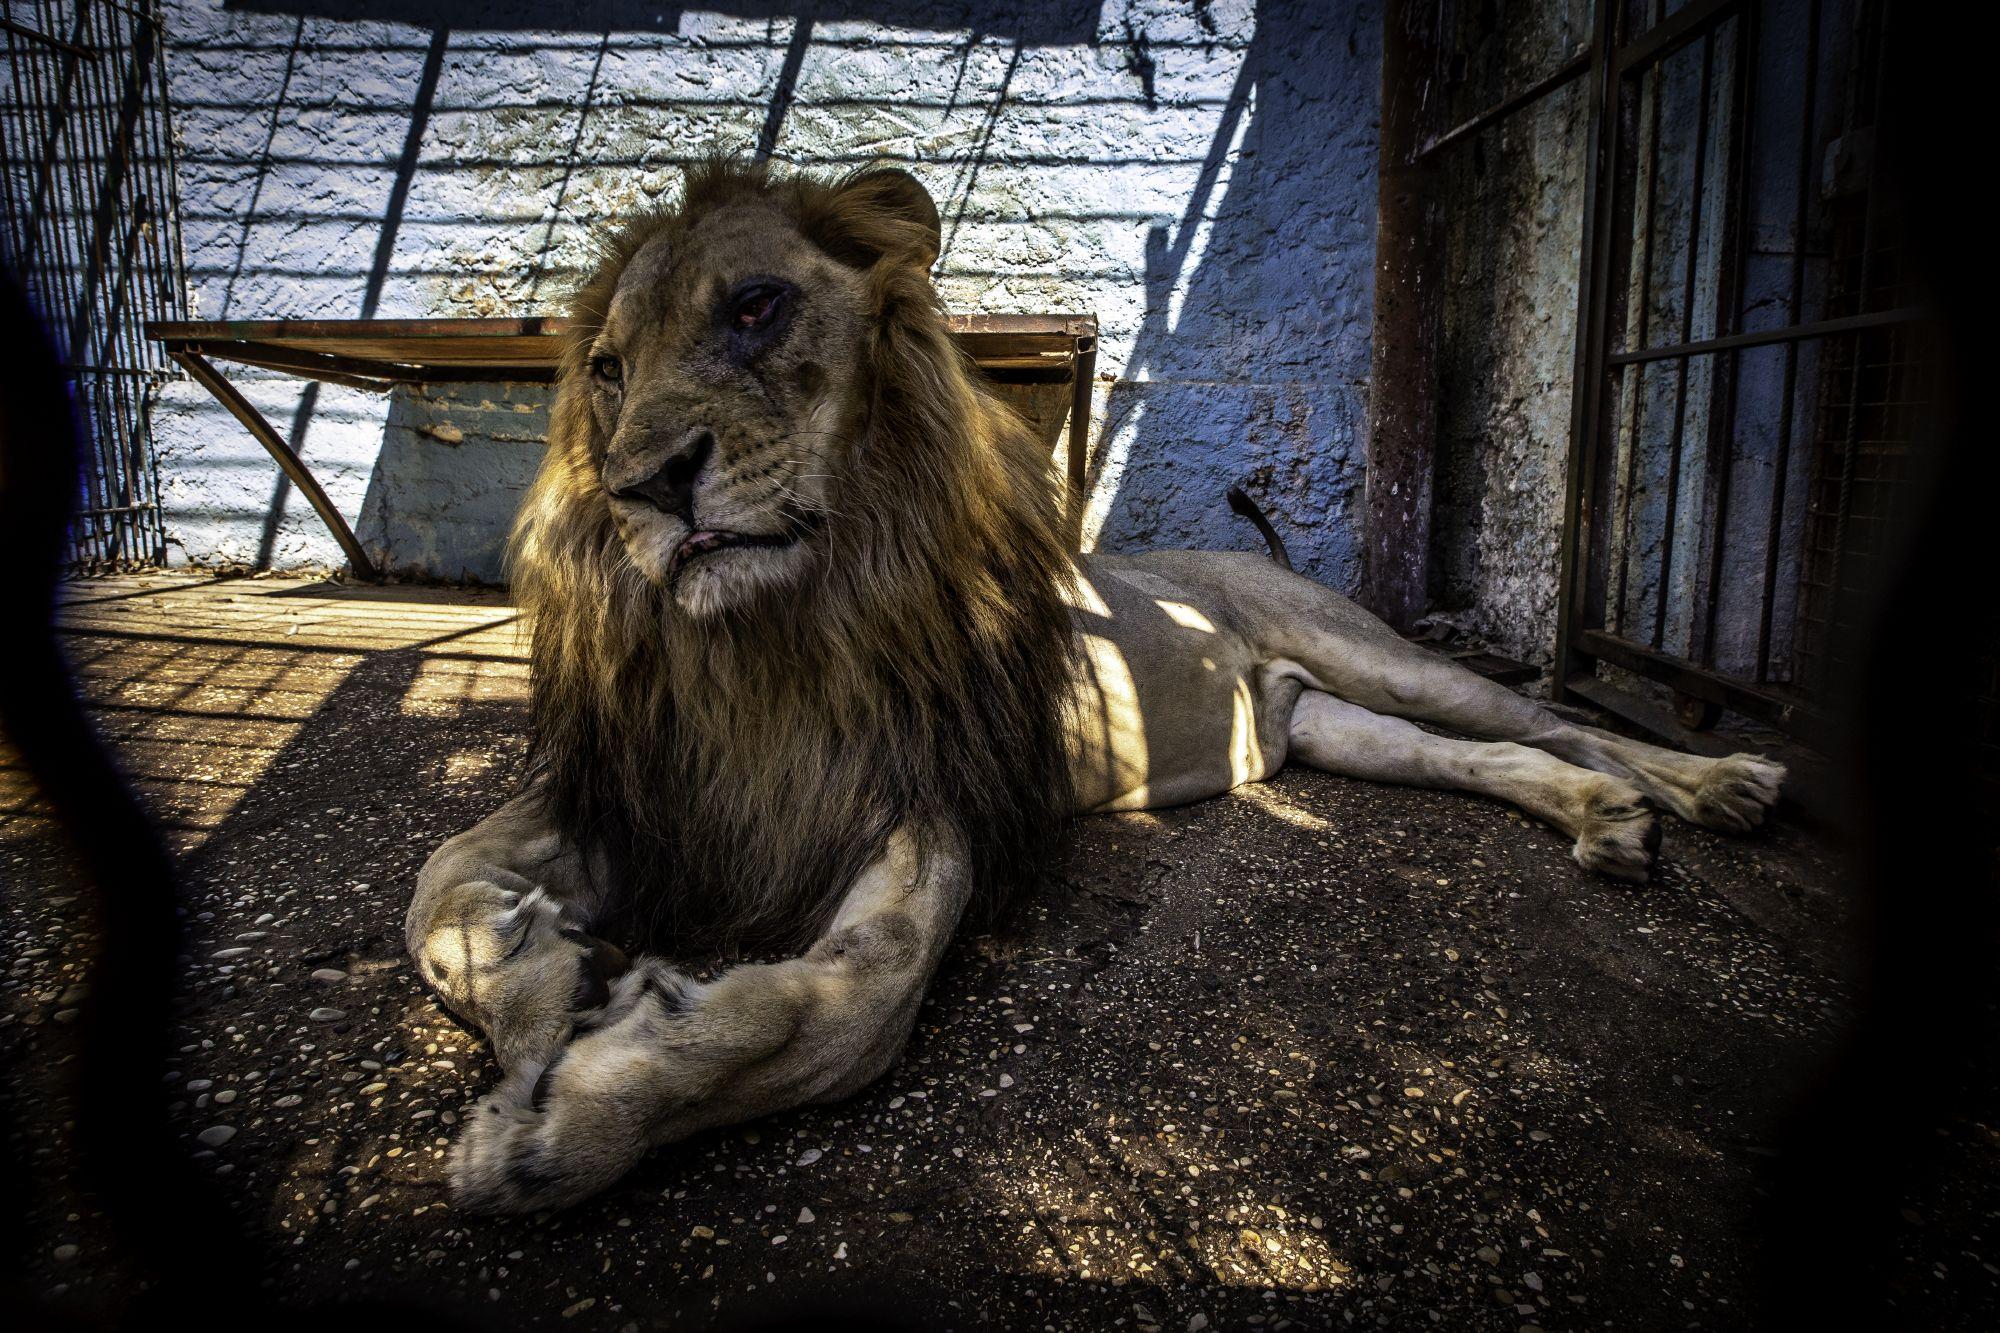 Neglected and malnourished lion